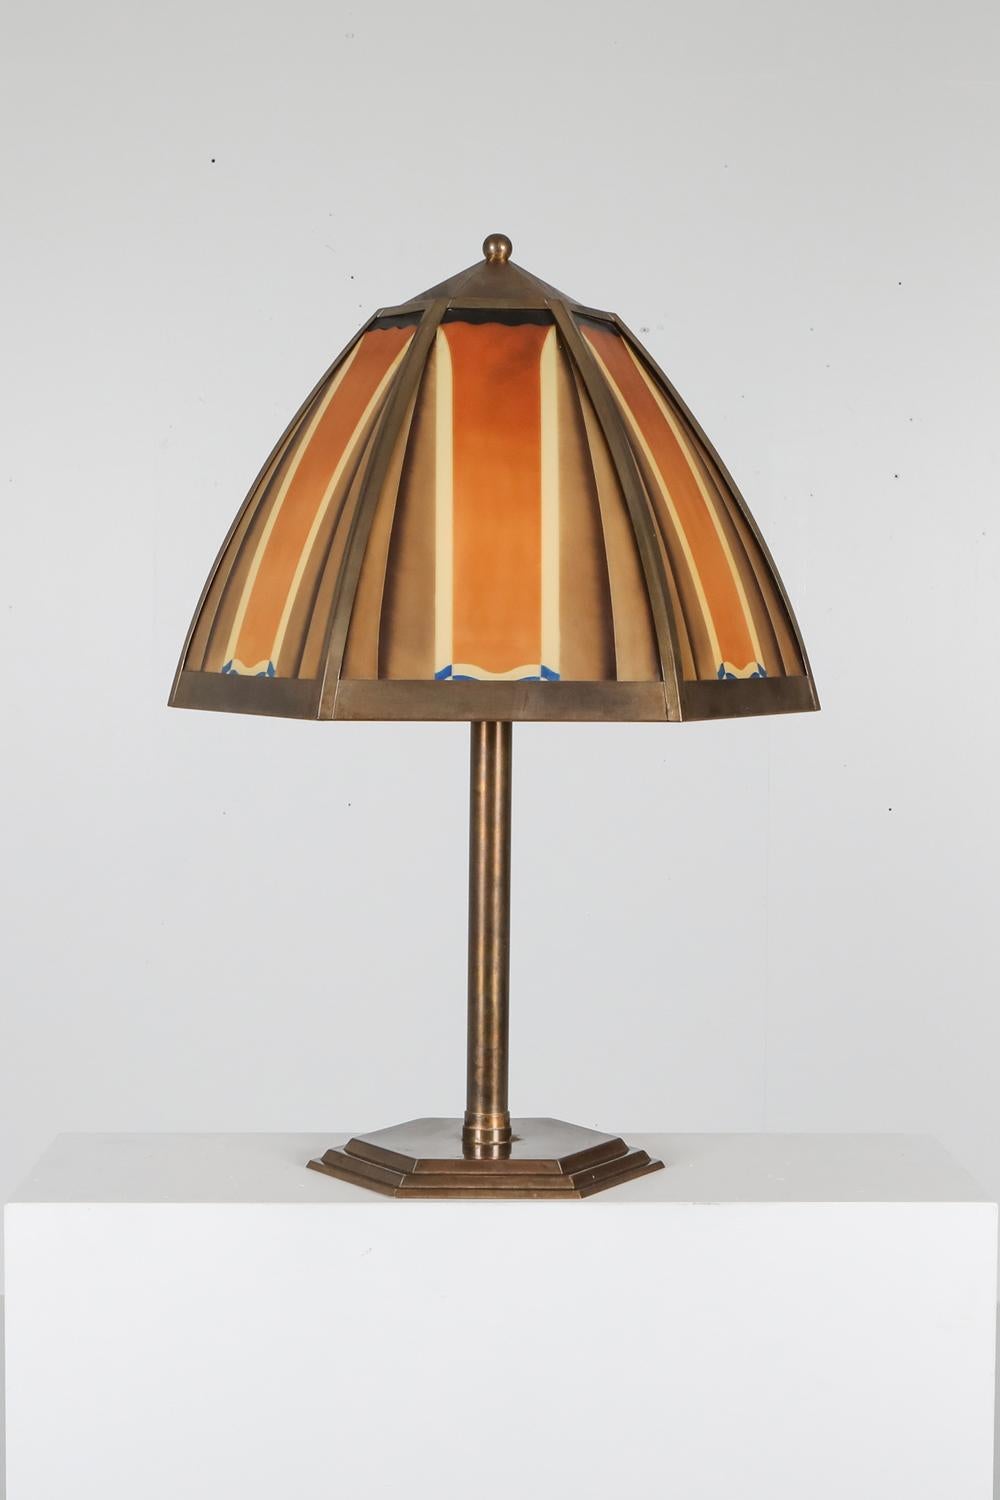 Bronze and Colored Glass Art Deco Lamp, Netherlands, 1920s For Sale 2